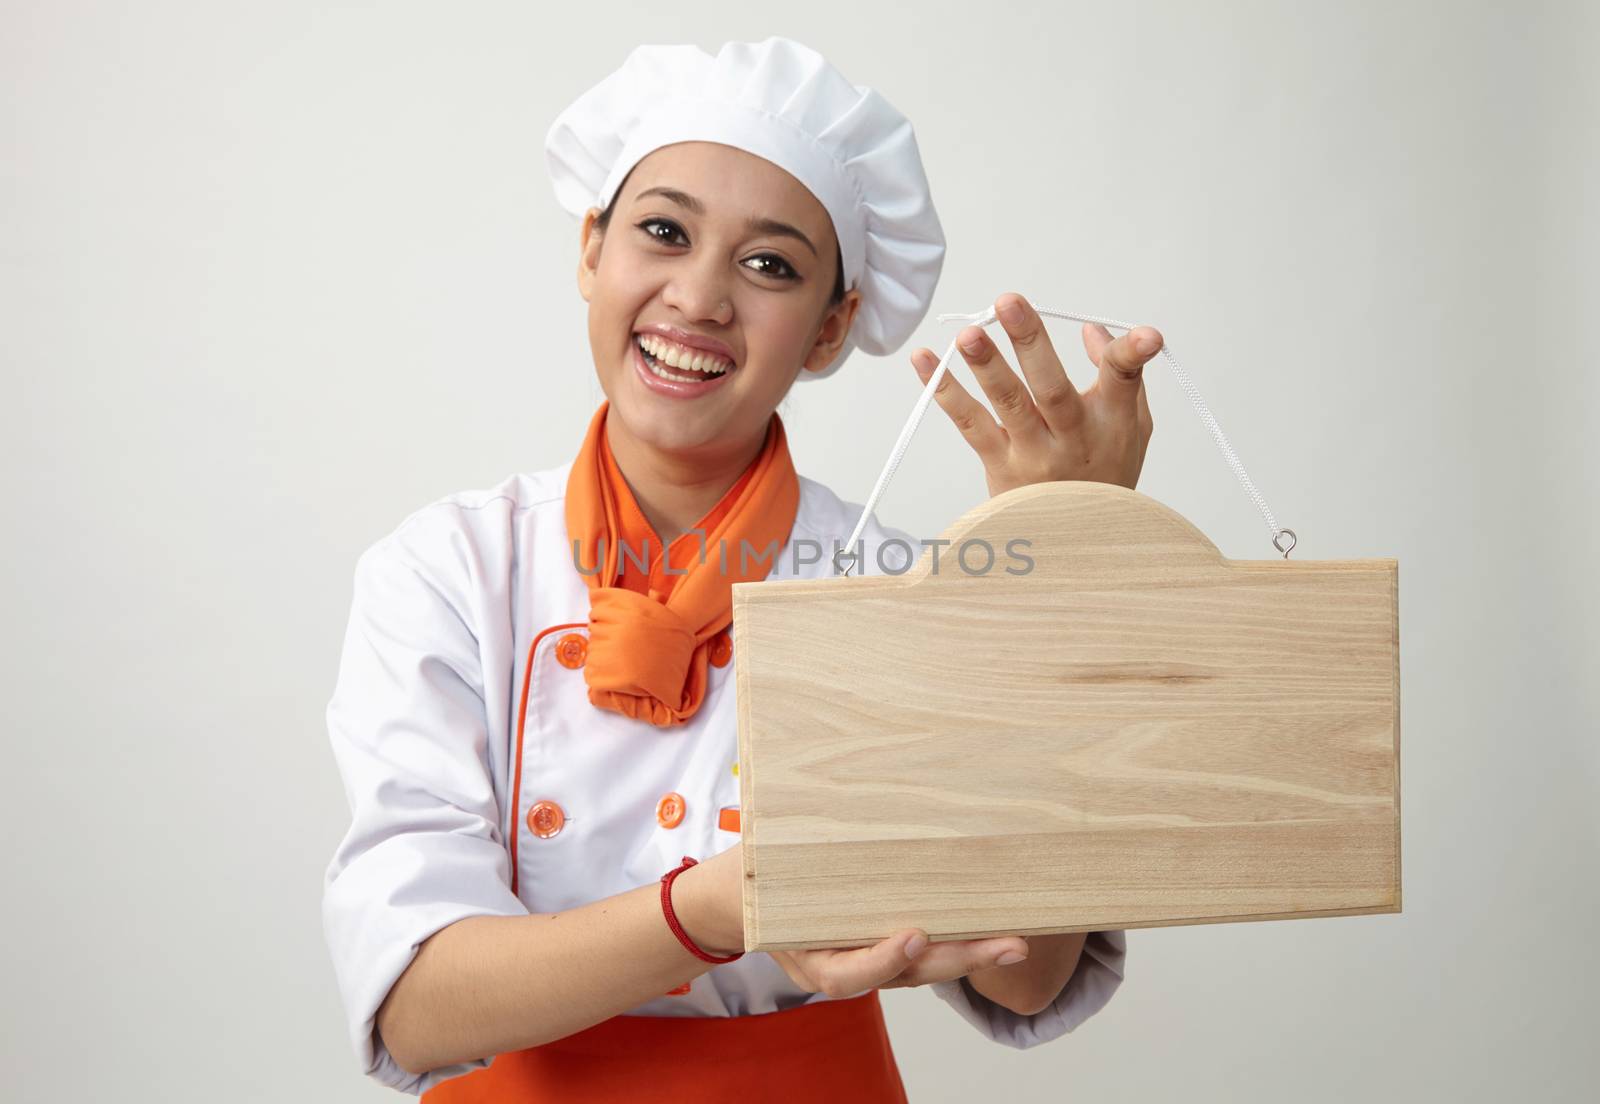  Indian woman with chef uniform holding a woden plank